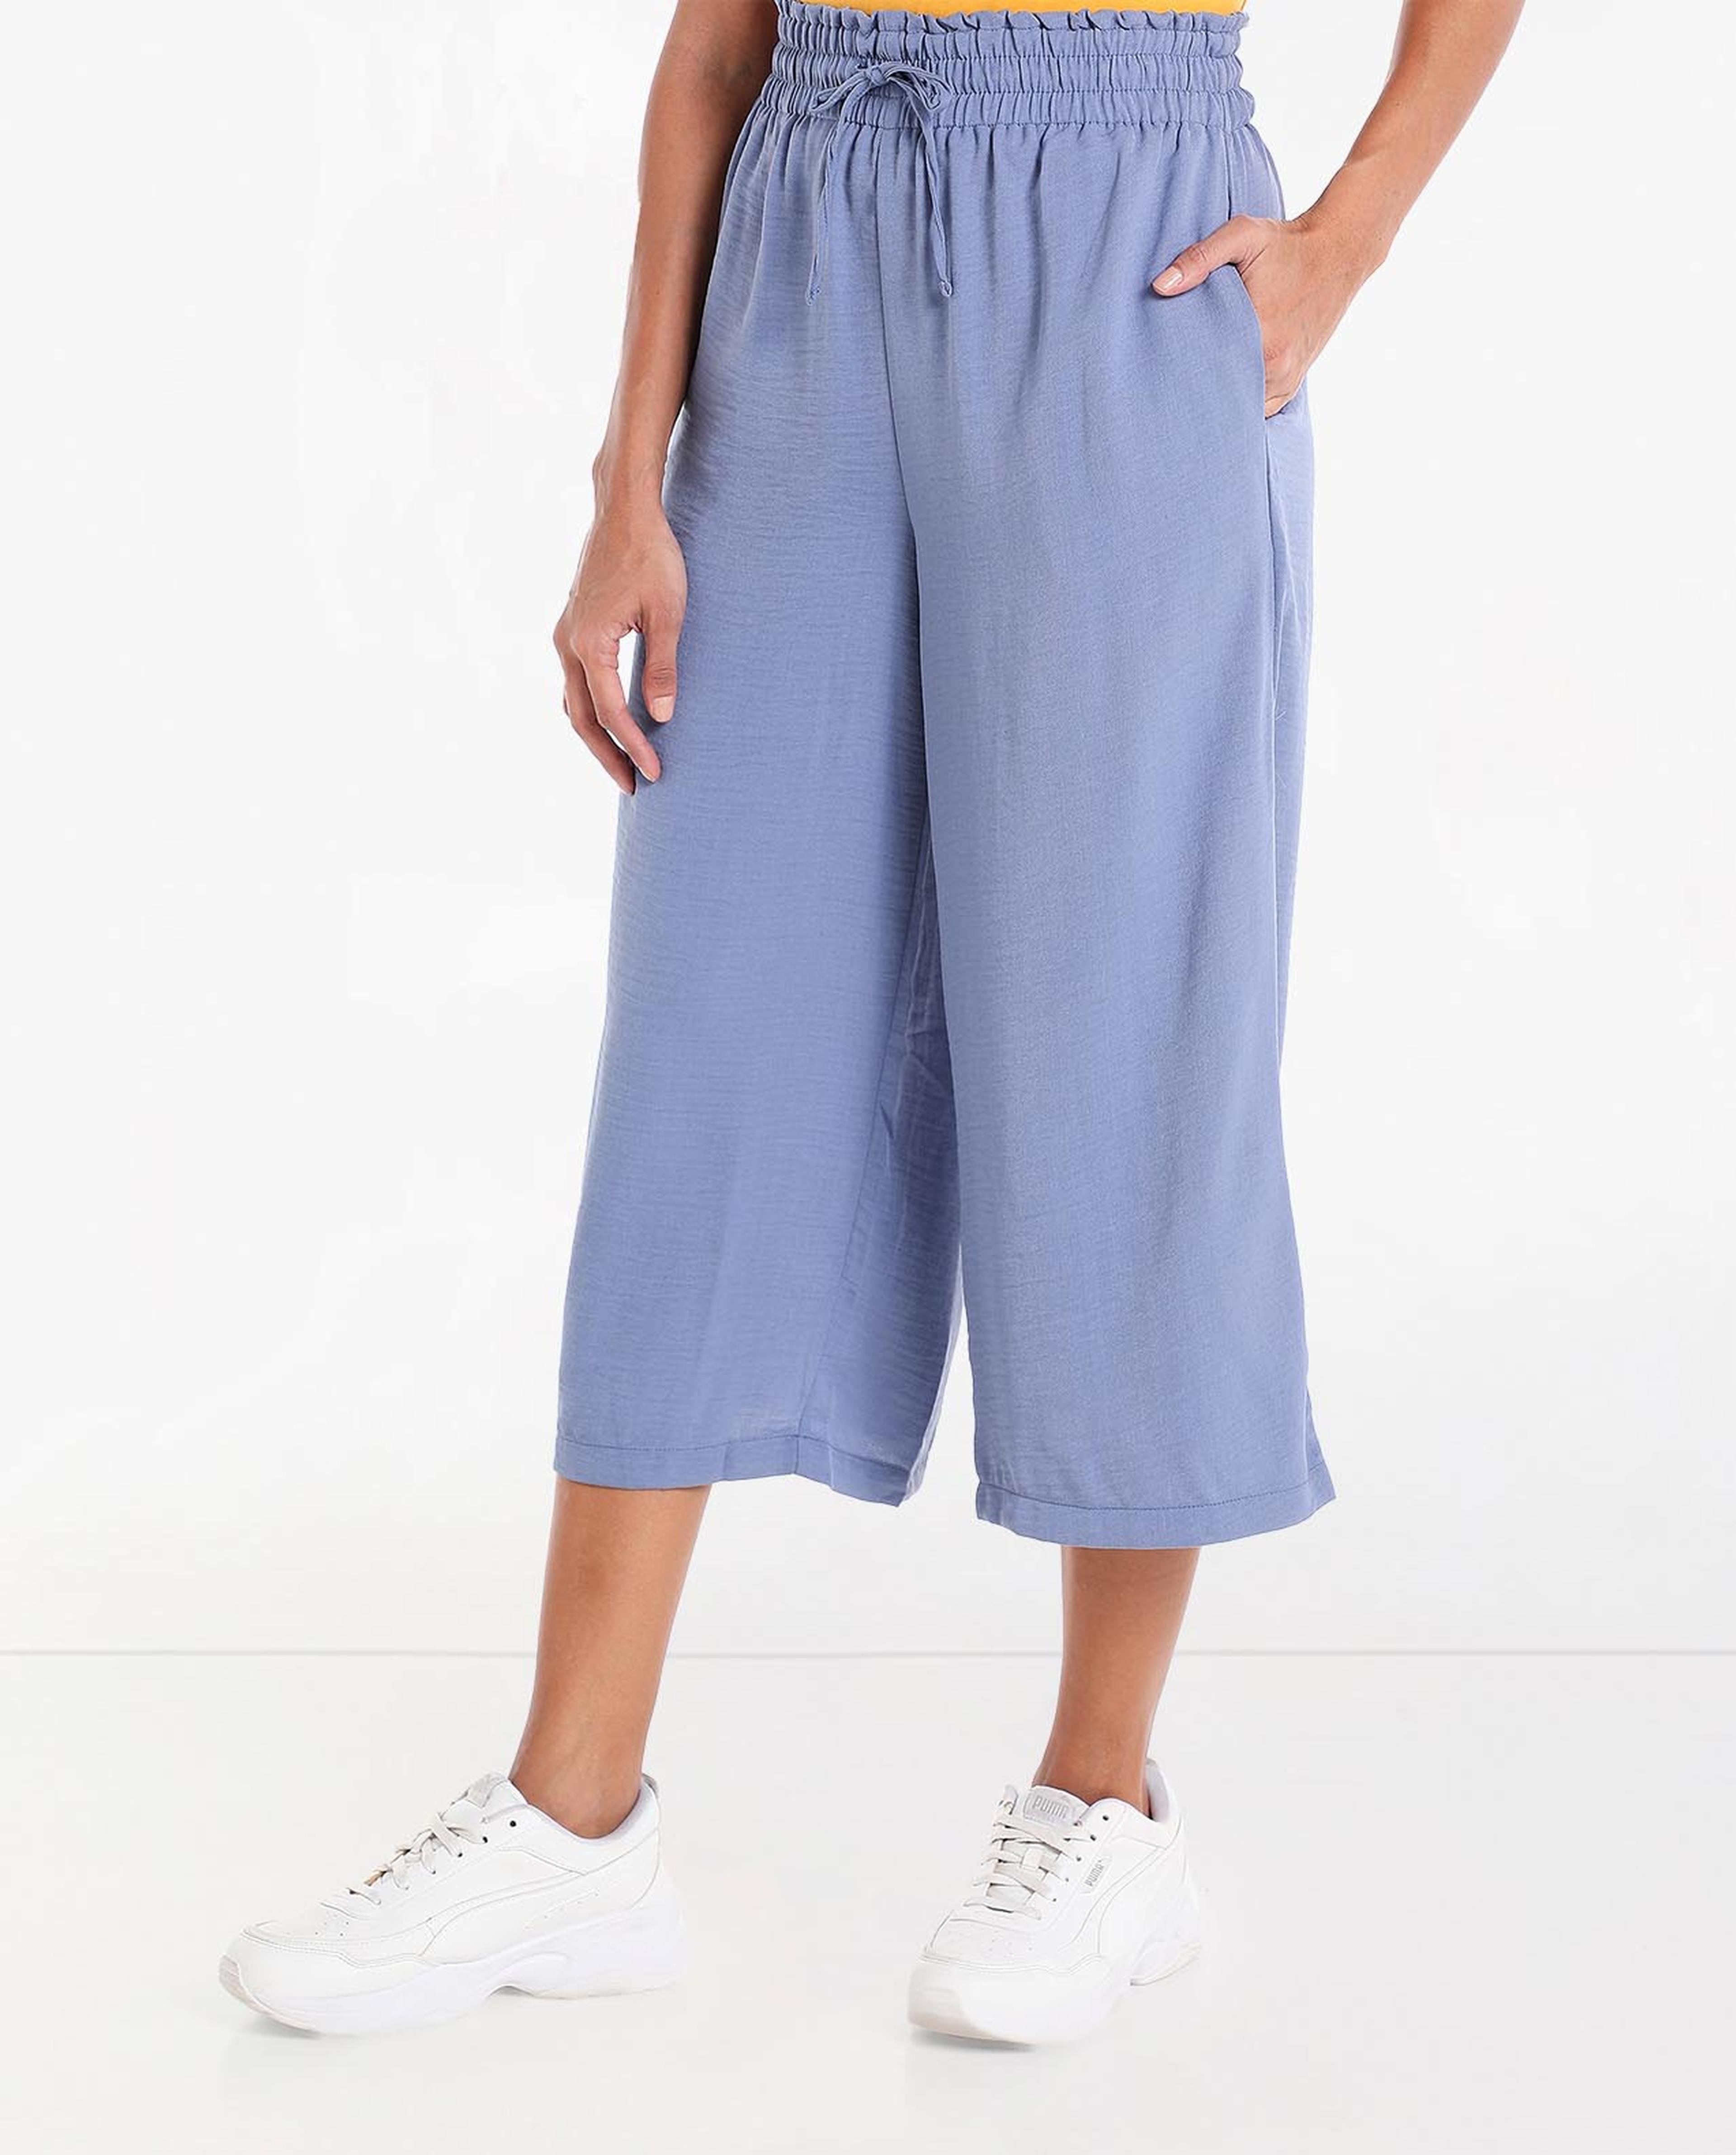 Solid Mid-Rise Culottes with Drawstring Closure